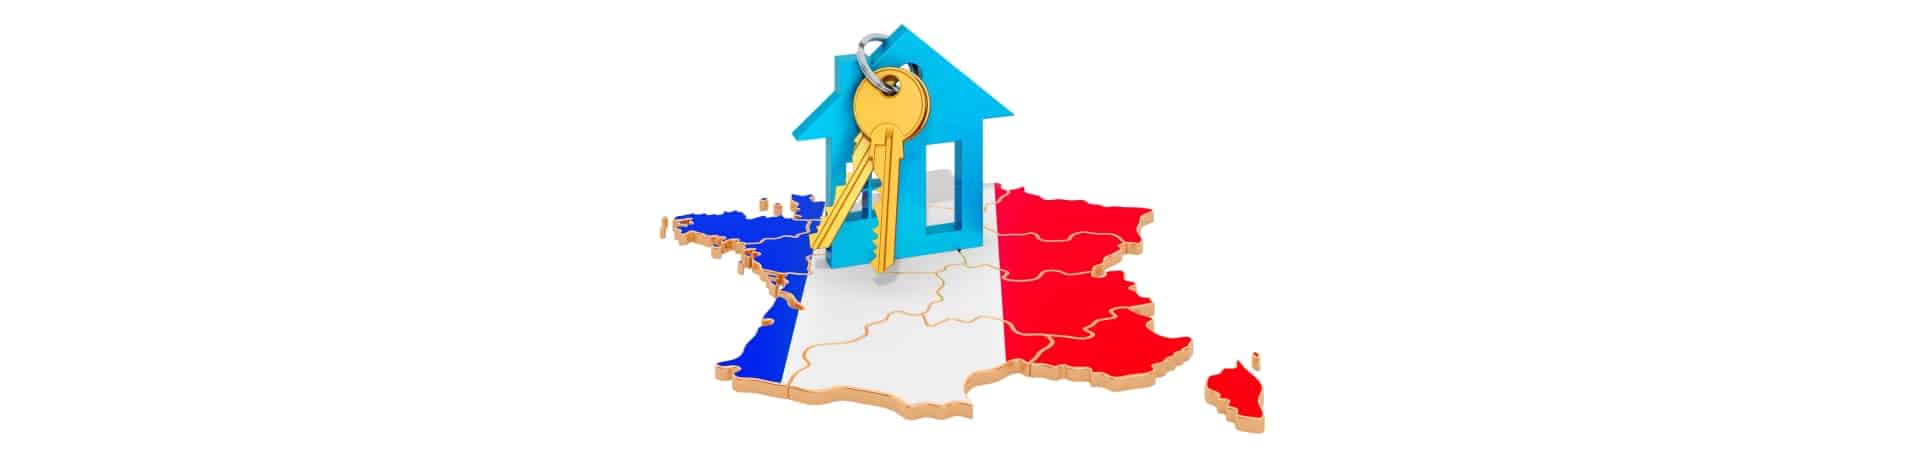 Power of attorney for buying or selling property in France